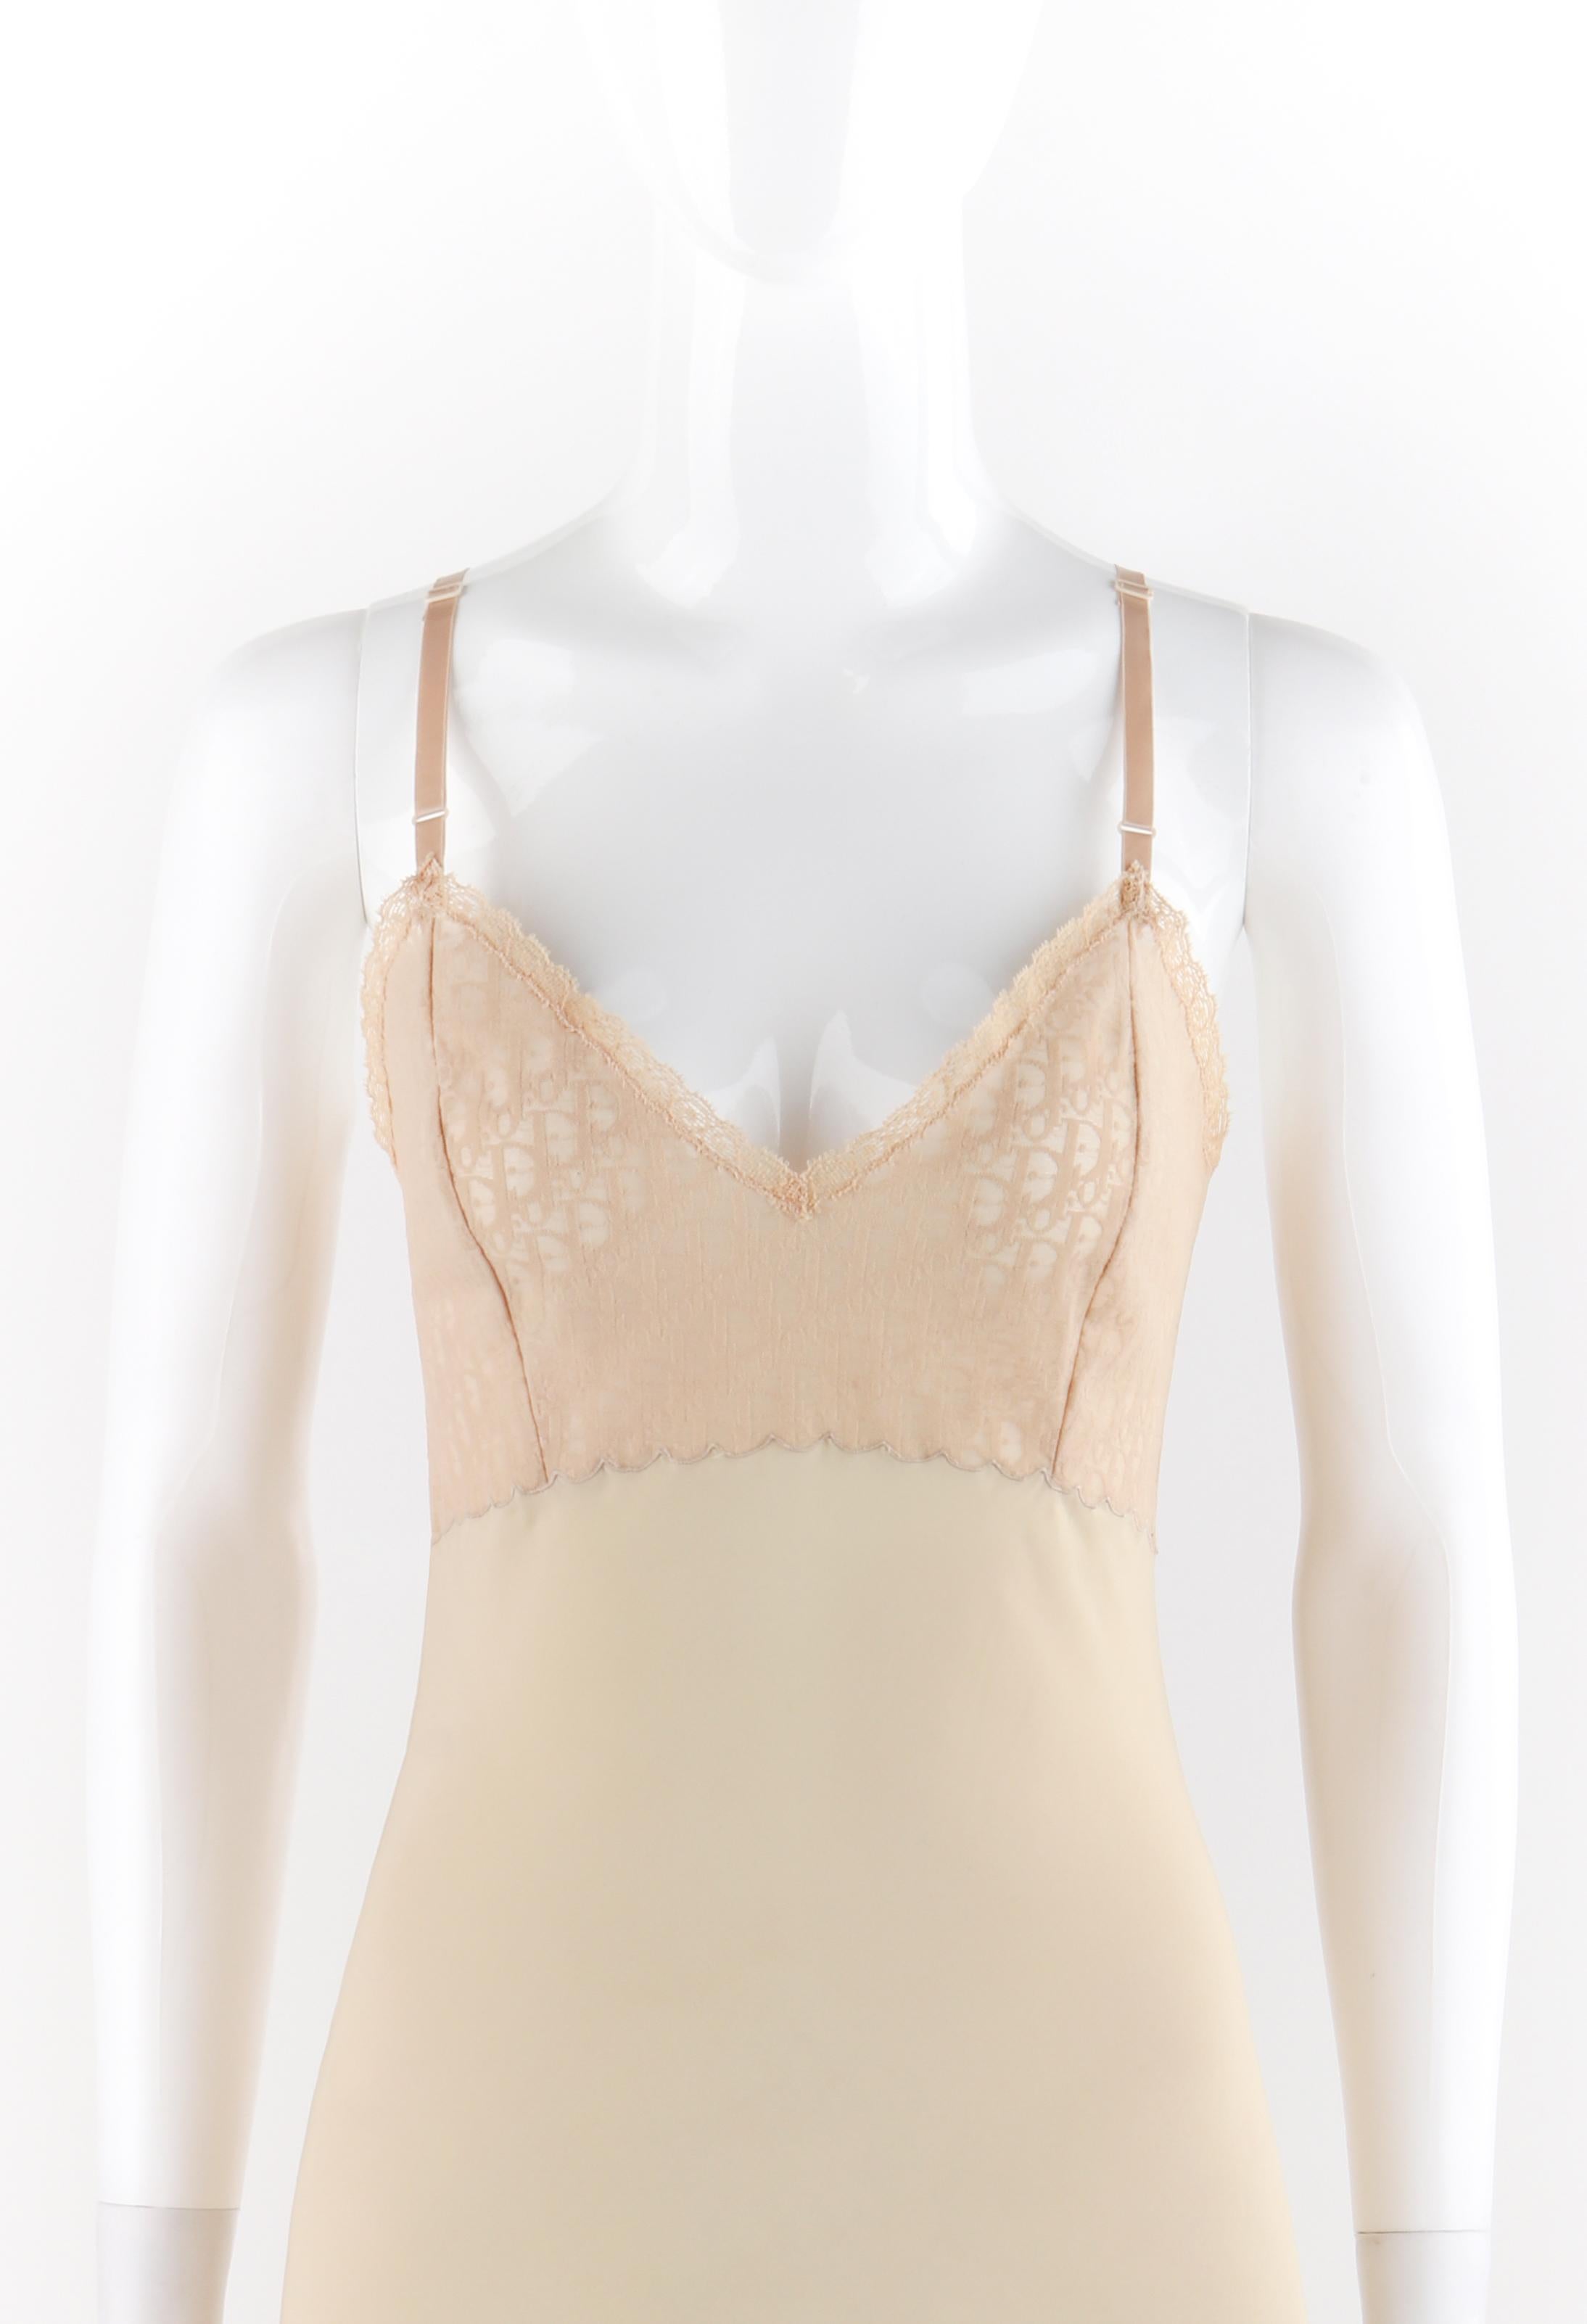 CHRISTIAN DIOR c.1970’s Nude Semi Sheer Signature Print Mesh Lace Panel Slip Dress
Circa: 1970’s
Label(s): Christian Dior Lingerie
Designer: Marc Bohan
Style: Slip
Color(s): Shades of Nude / Peach
Lined: No
Marked Fabric Content: “45% Nylon, 30%